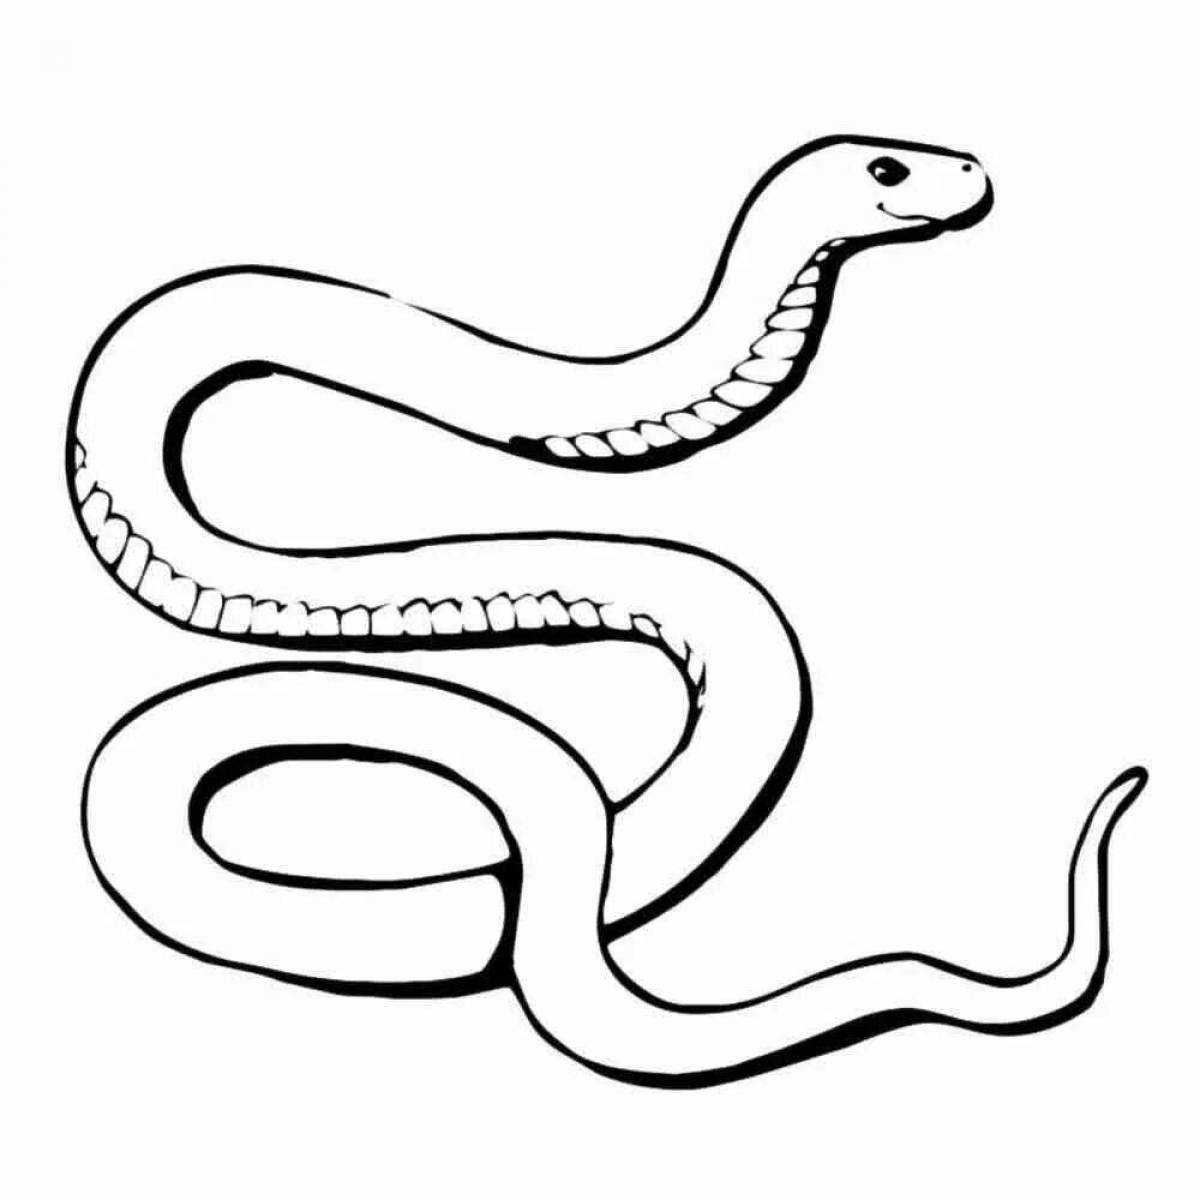 Intricate viper coloring page